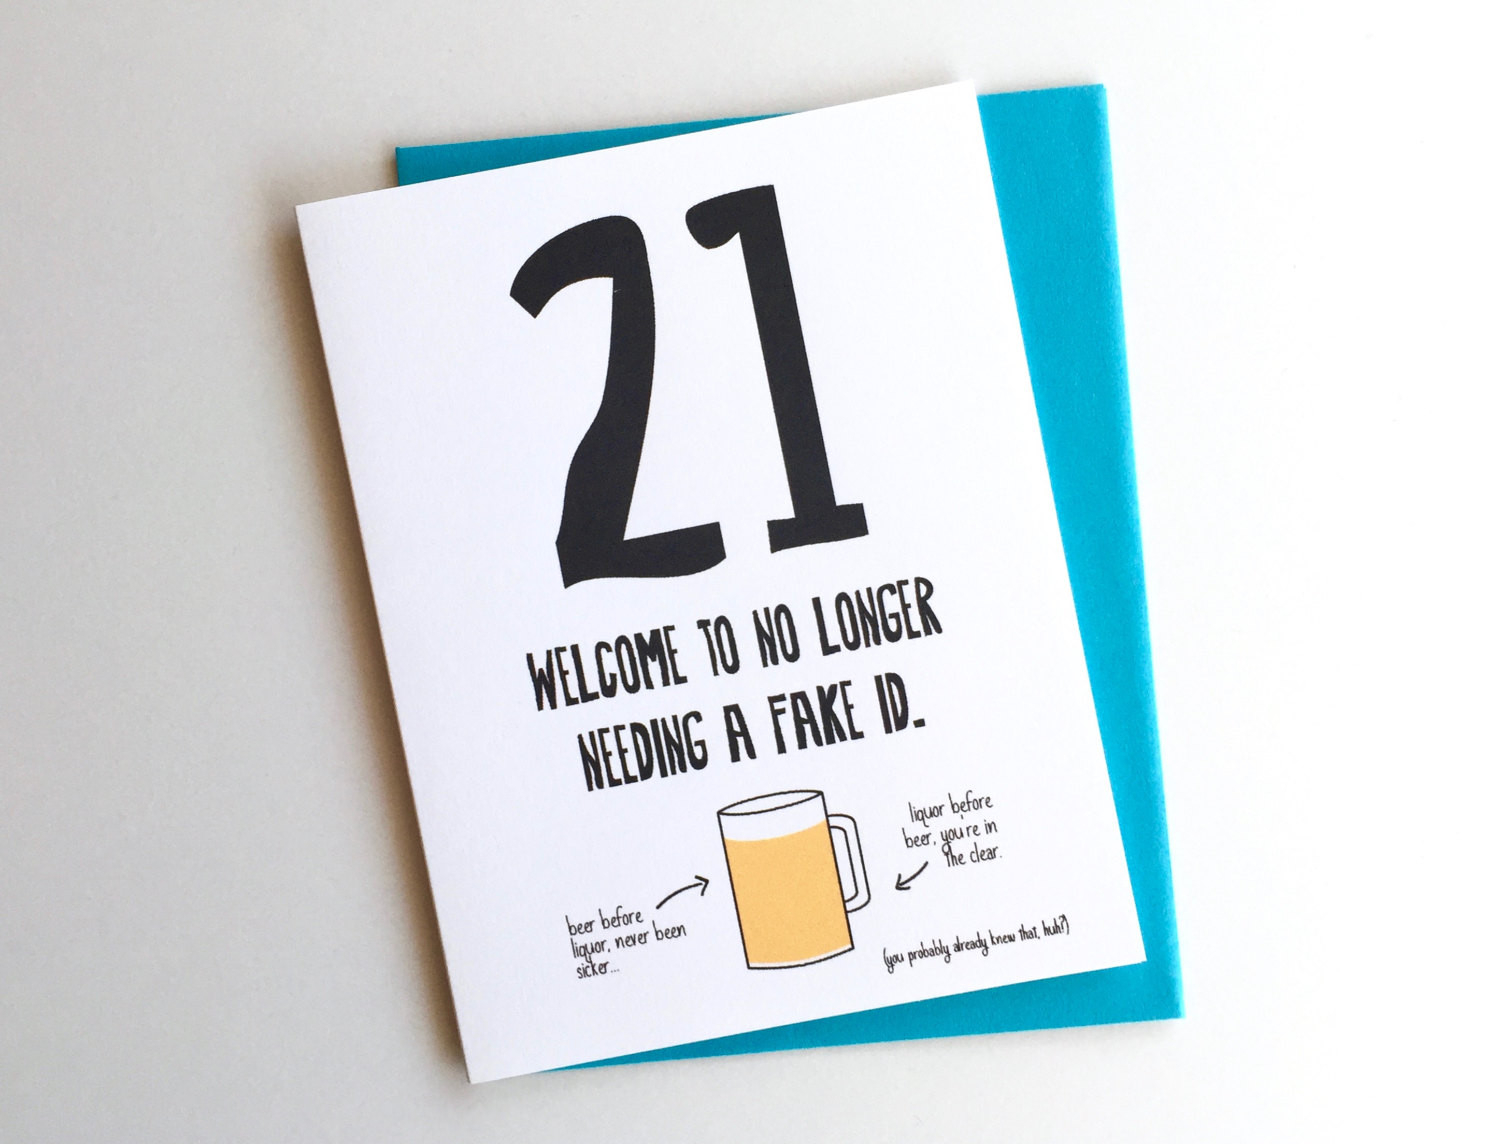 21St Birthday Card Ideas The 20 Best Ideas For Funny 21st Birthday Cards Home Inspiration